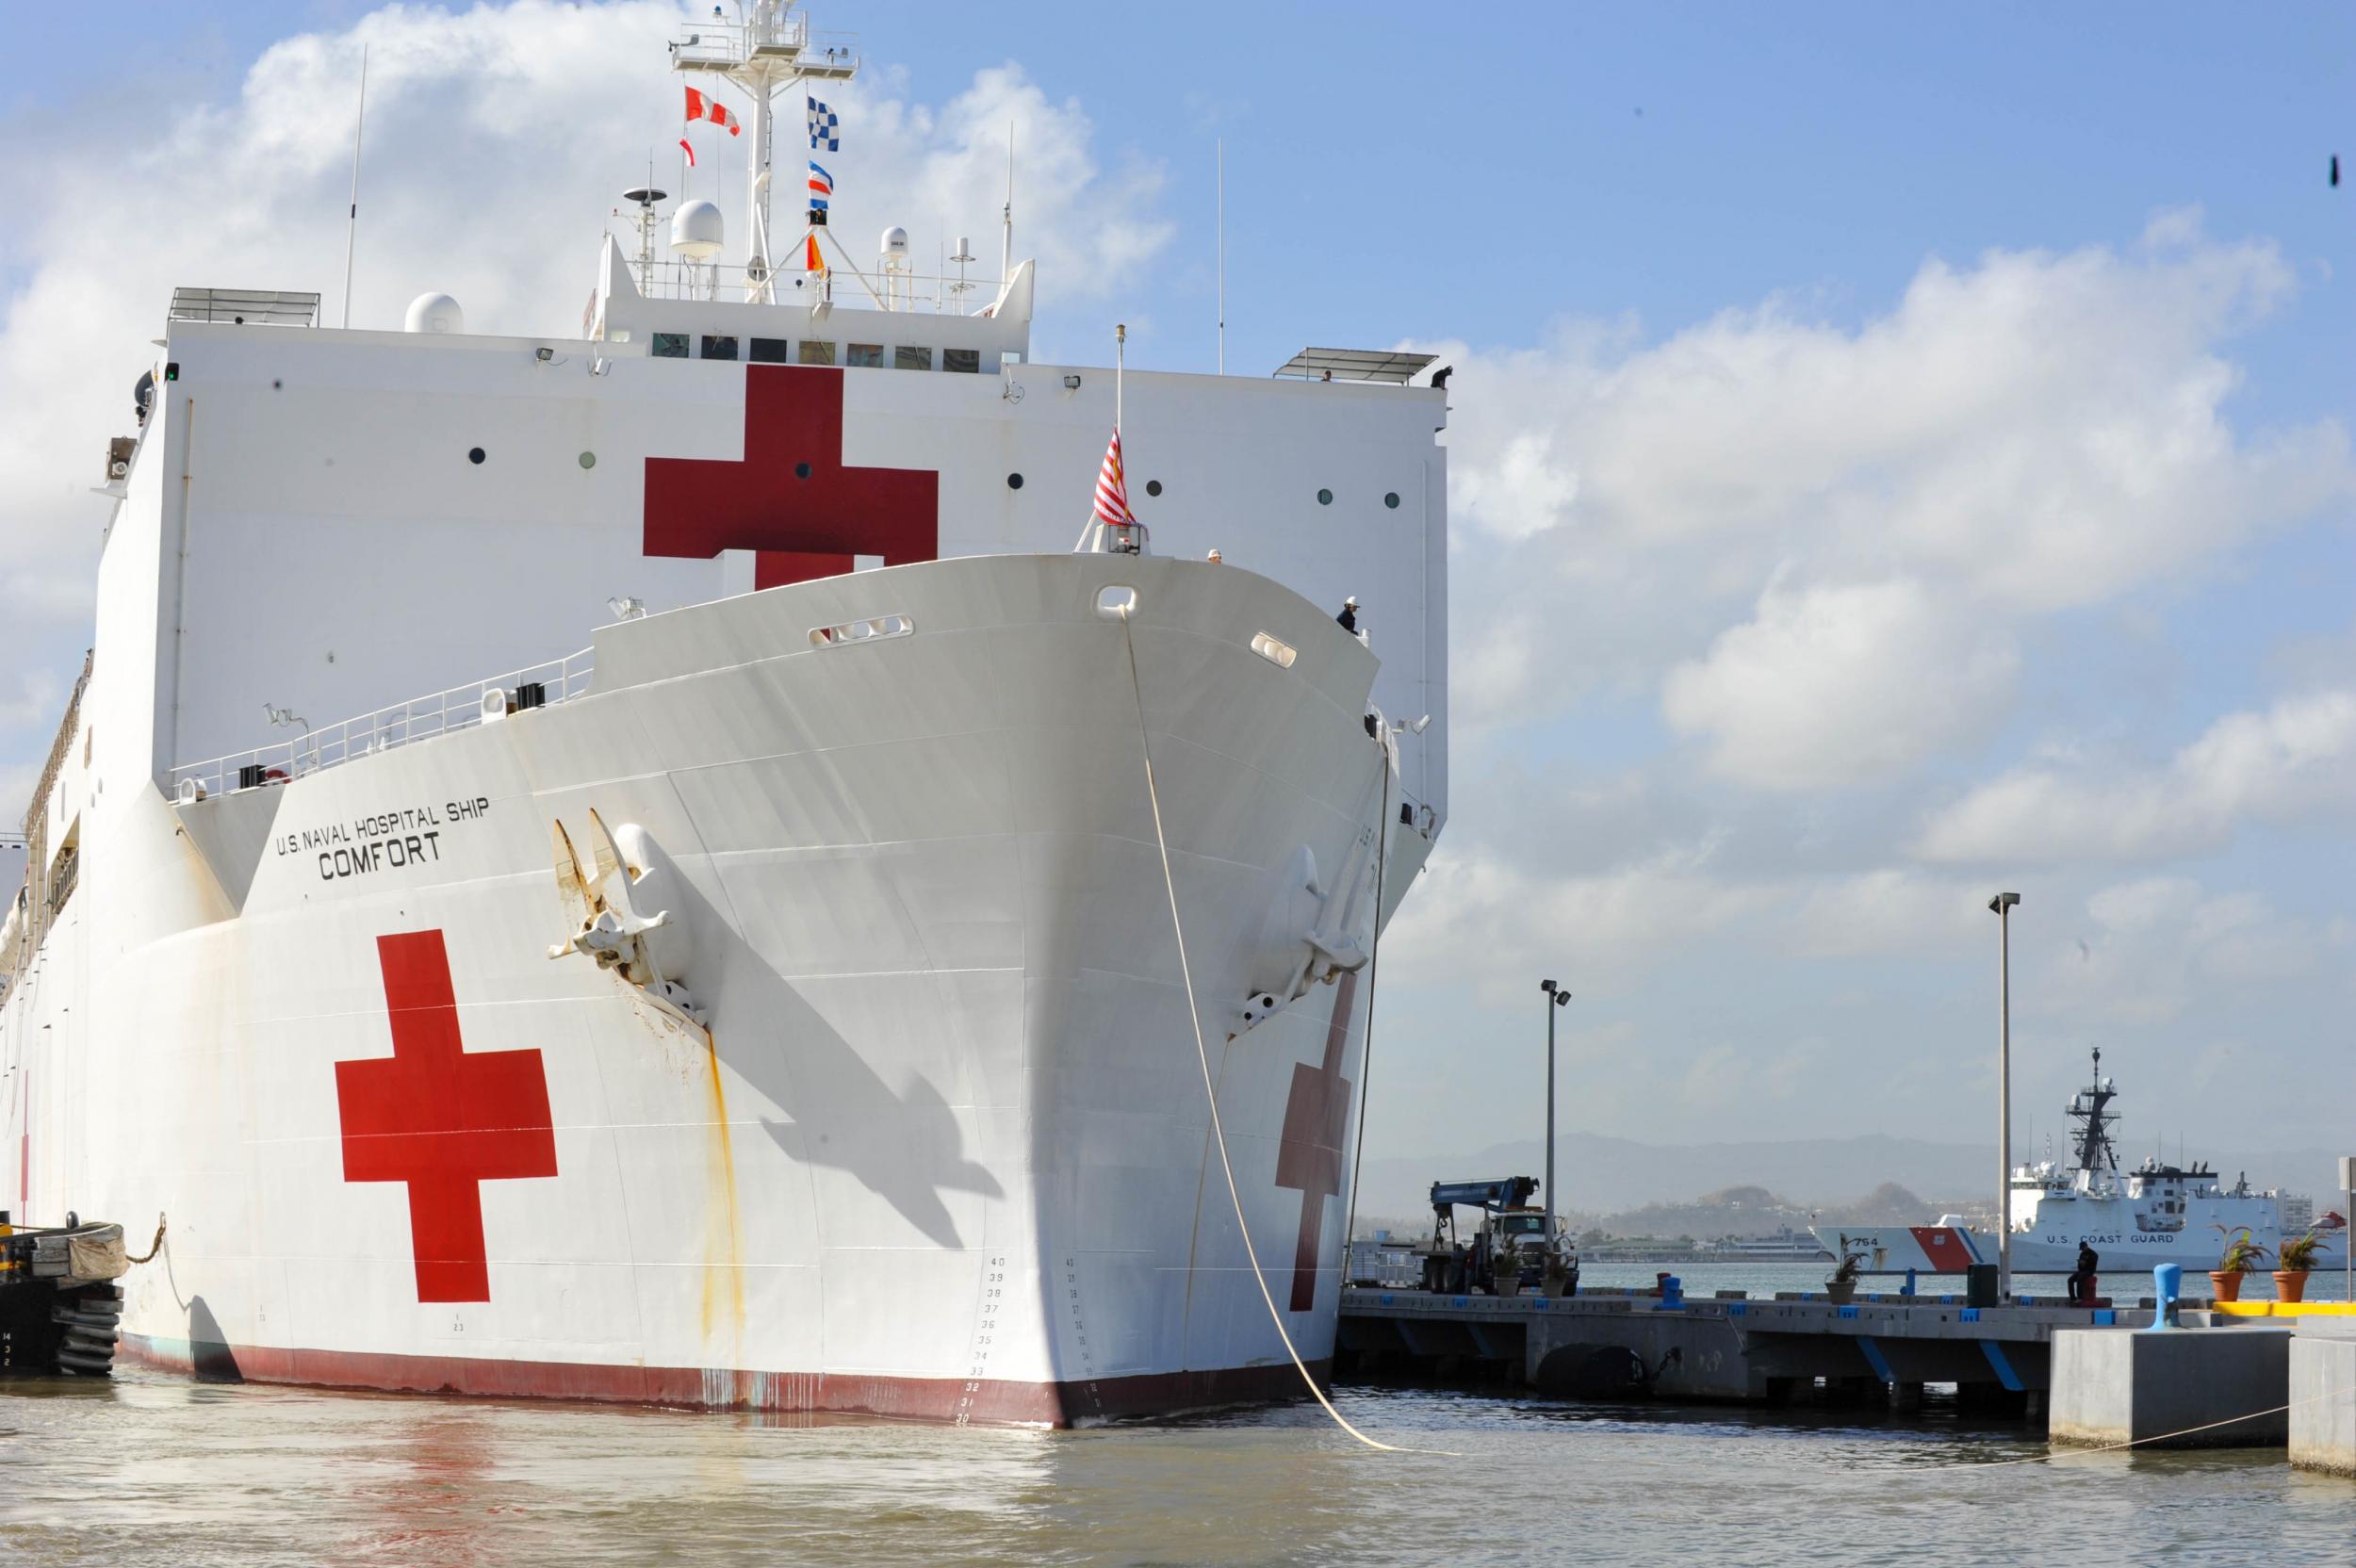 Coronavirus: Pentagon makes hospital ships and labs available to treat civilians, report says